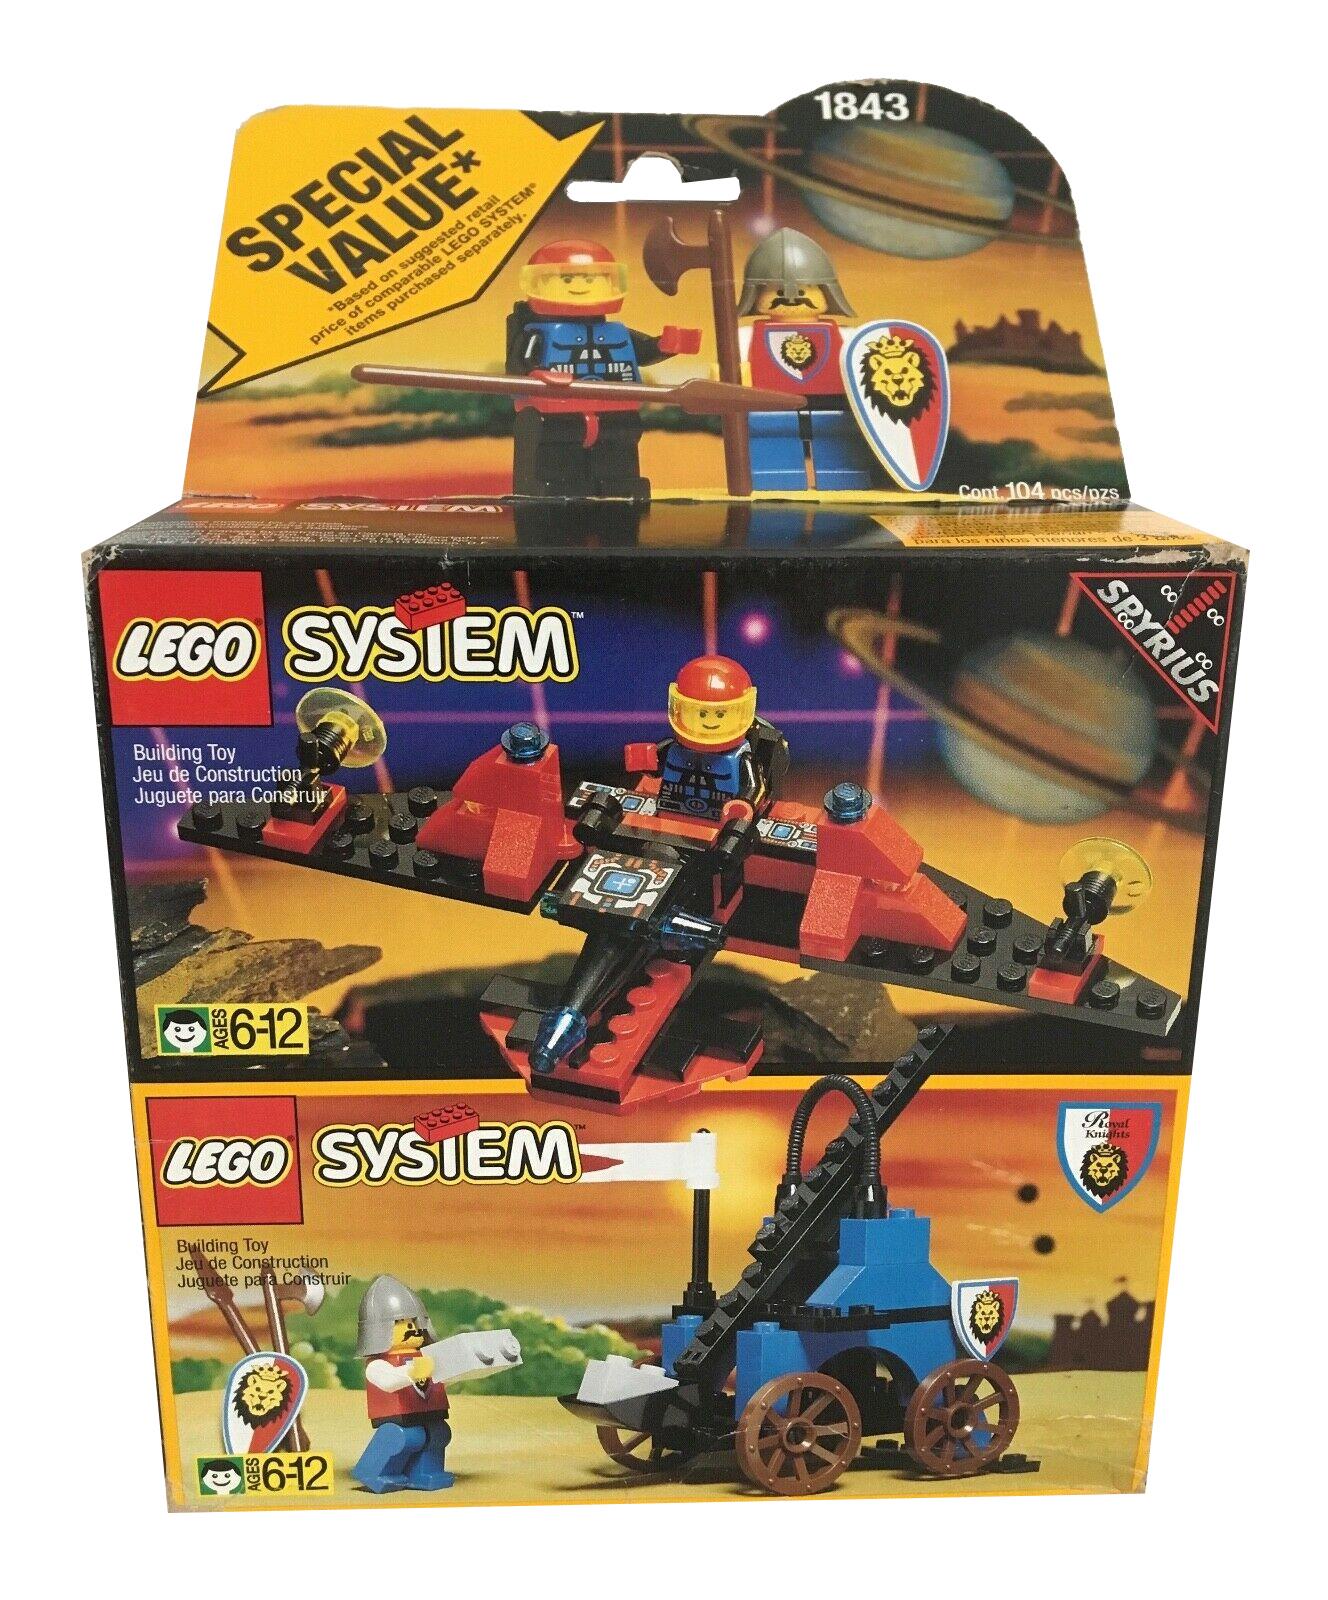 LEGO 1843 Castle Space Royal Knights Catapult Spyrius Spacecraft for sale online 